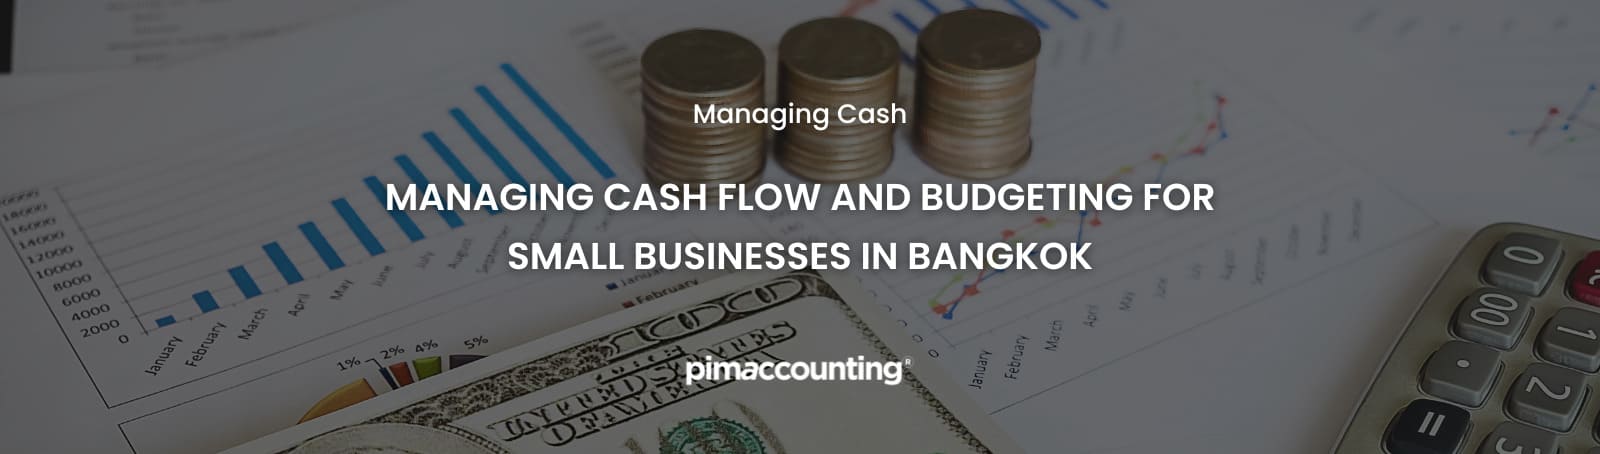 cash flow and budgeting - pimaccounting